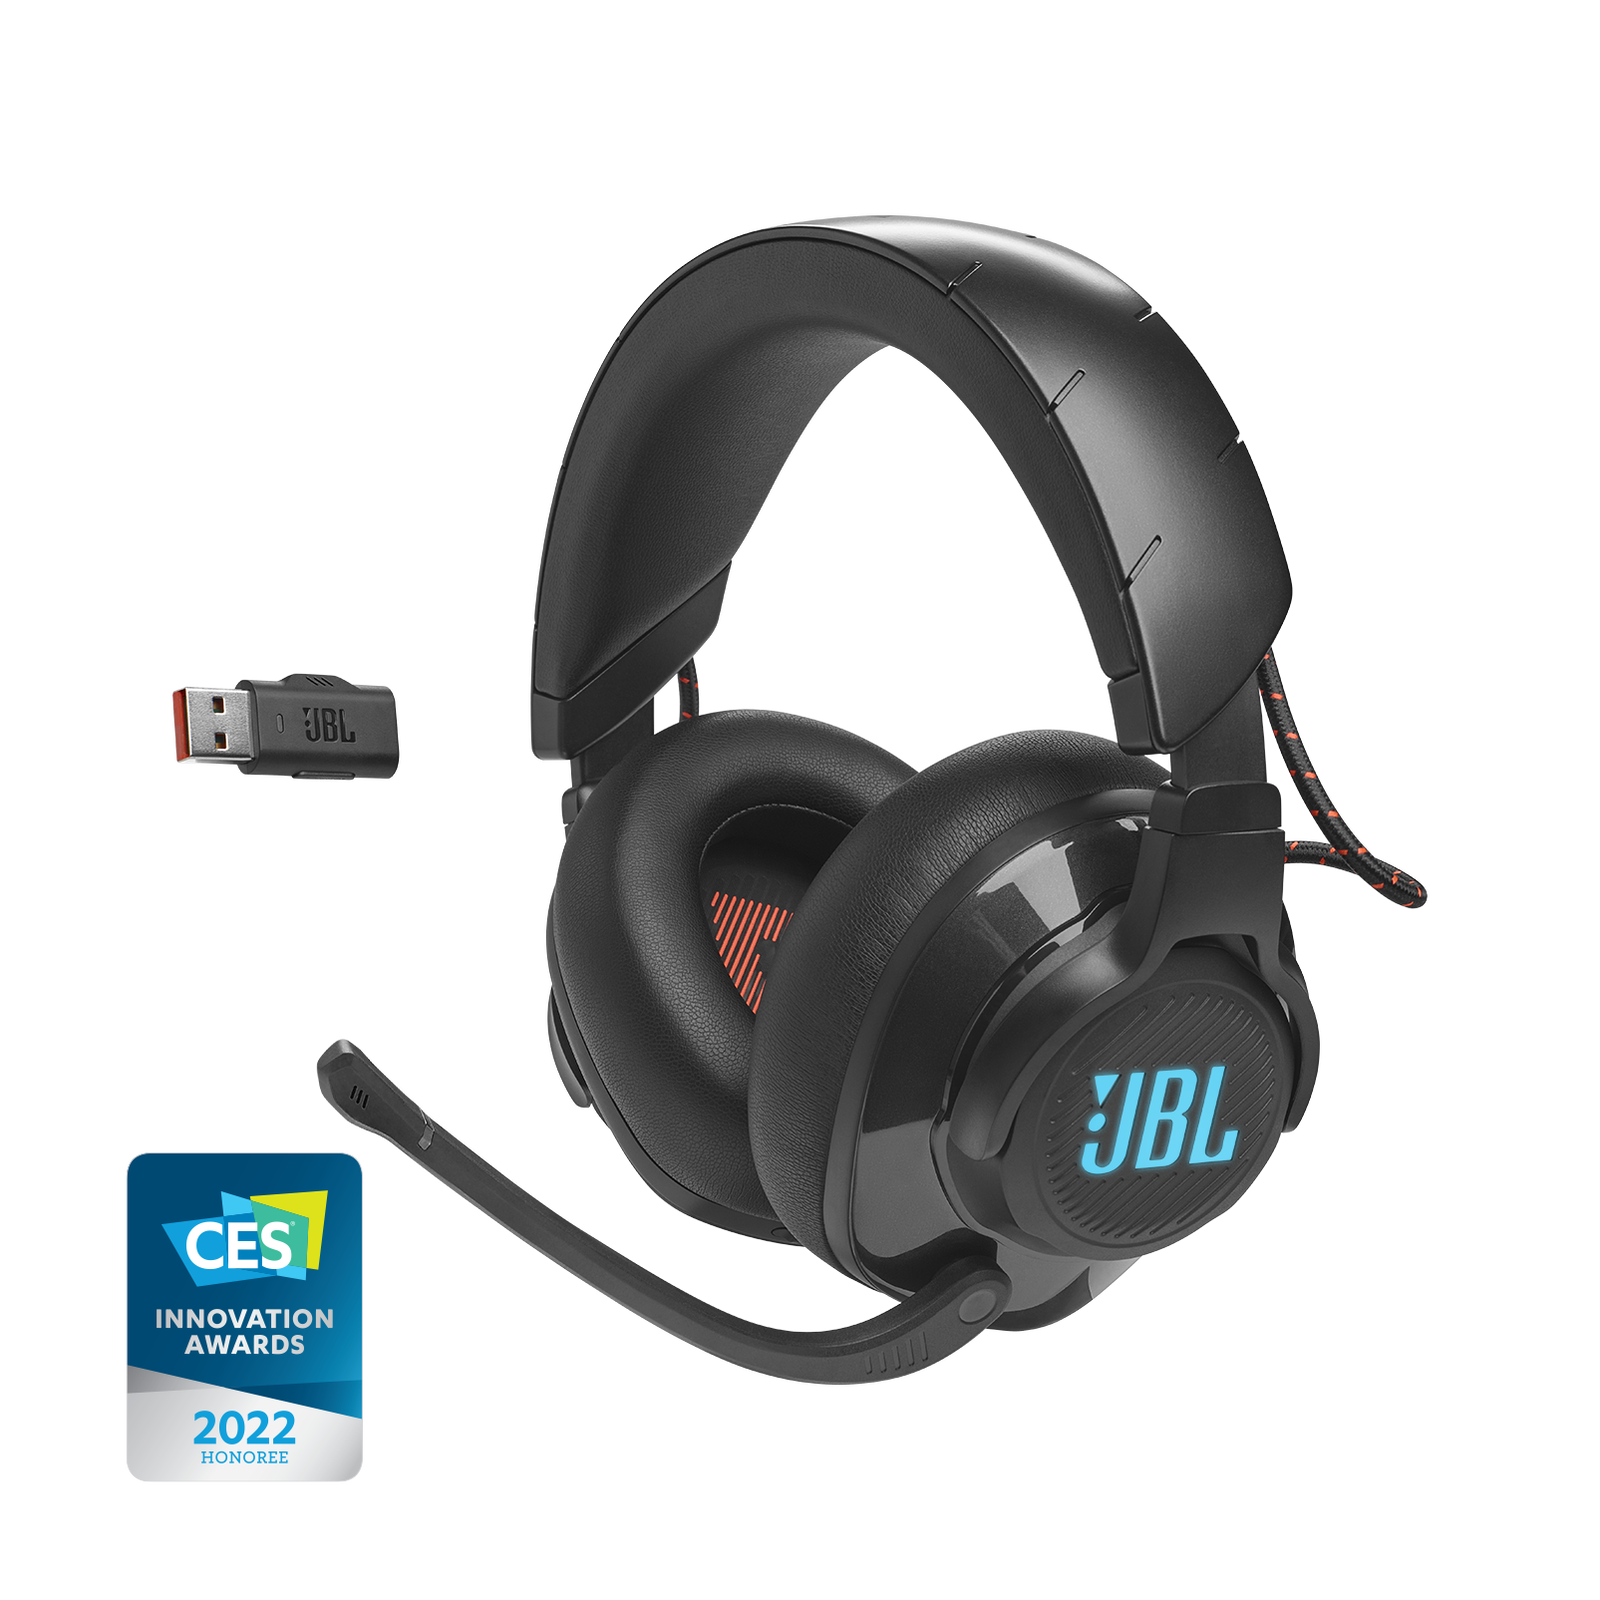 JBL Quantum 610 Black | Over-Ear 2.4G Wireless Gaming Headset - JBL 9.1 Surround Sound & Mic Noise Cancelling - PS5/XBOX One/Switch/PC Compatible Gaming Headset REFURBISHED